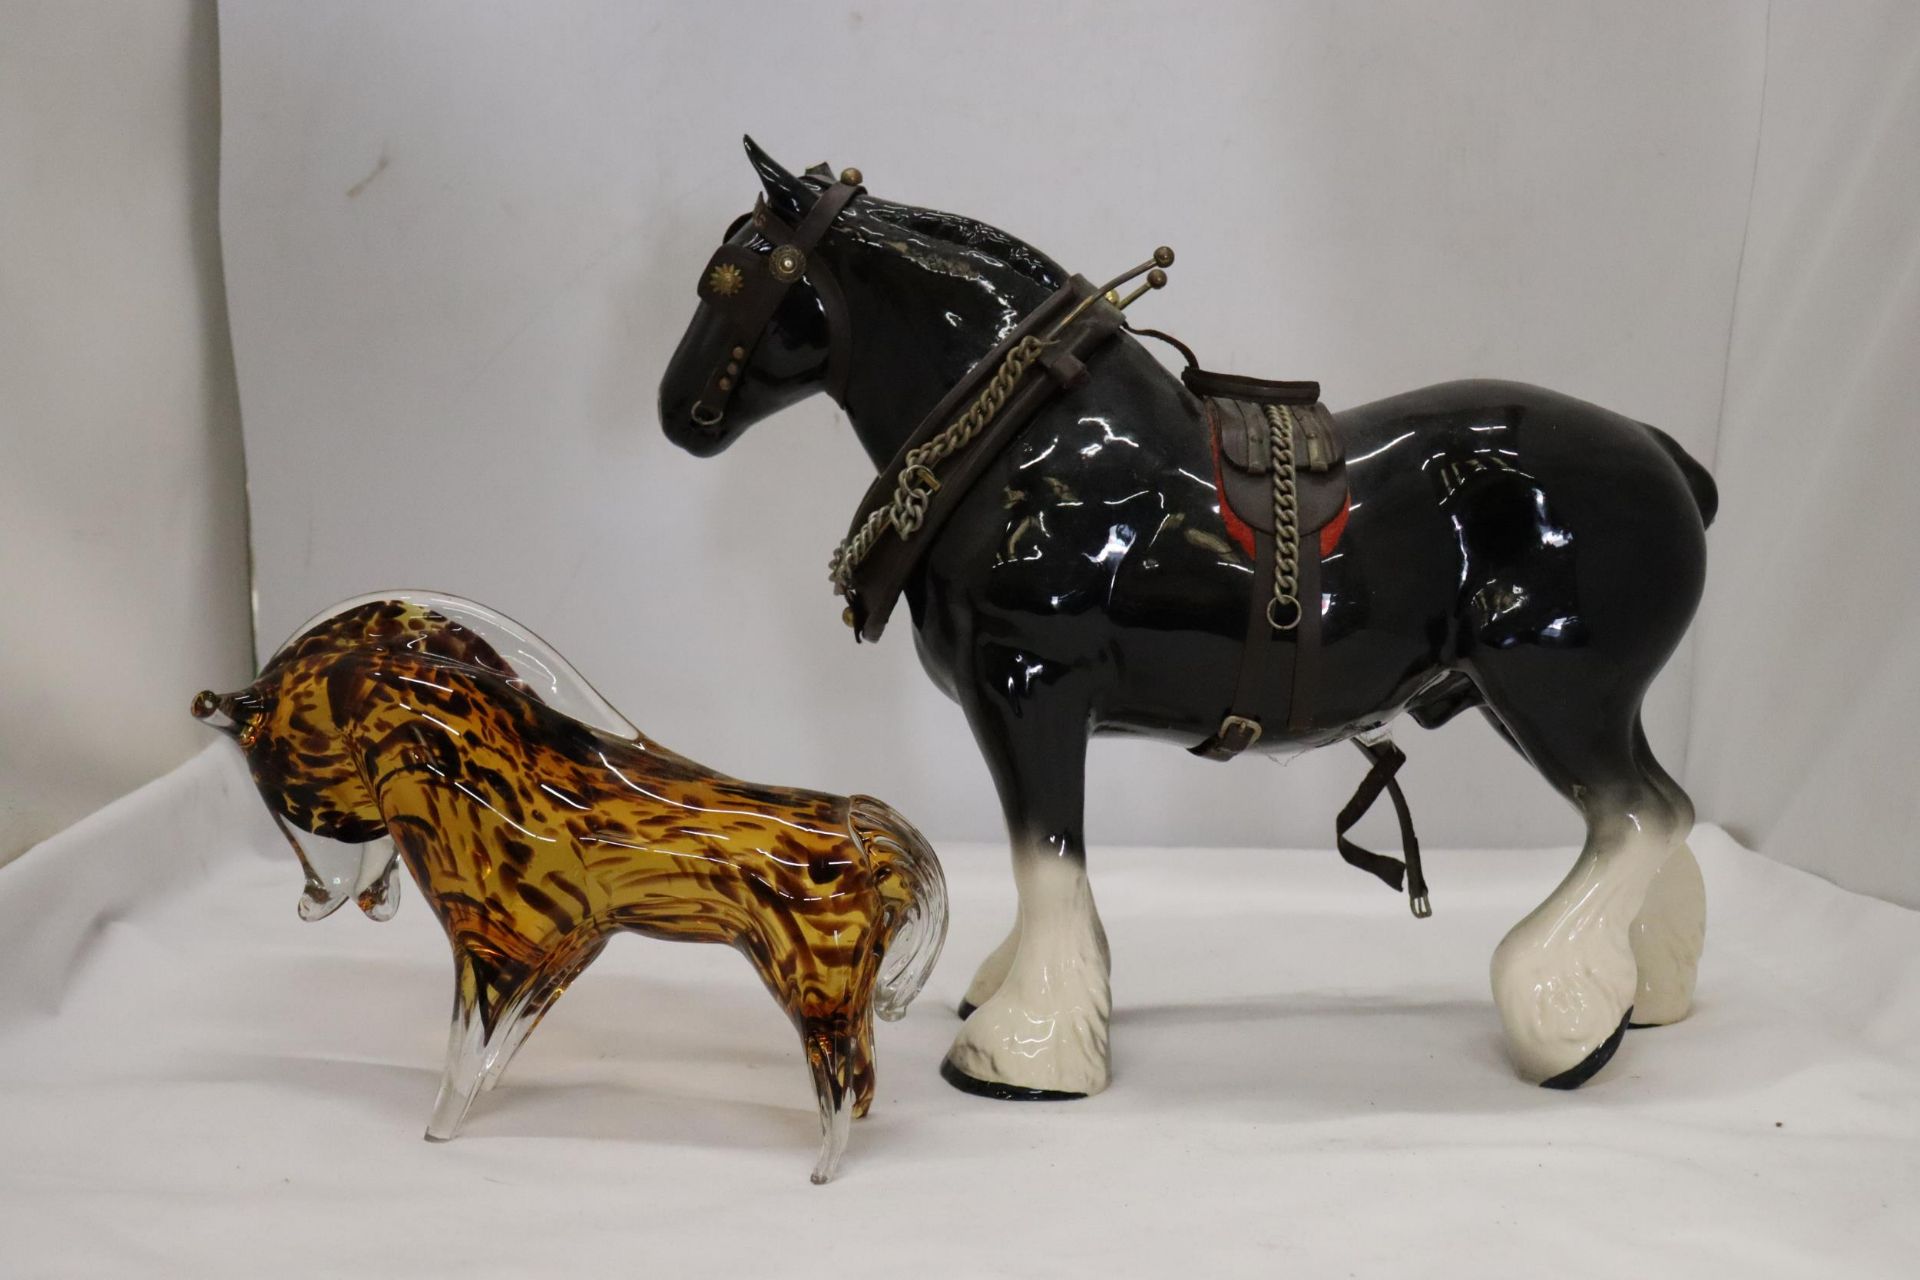 A LARGE SHIRE HORSE WITH HARNESS PLUS A HEAVY GLASS 'TORTOISESHELL' BULL - Image 6 of 9